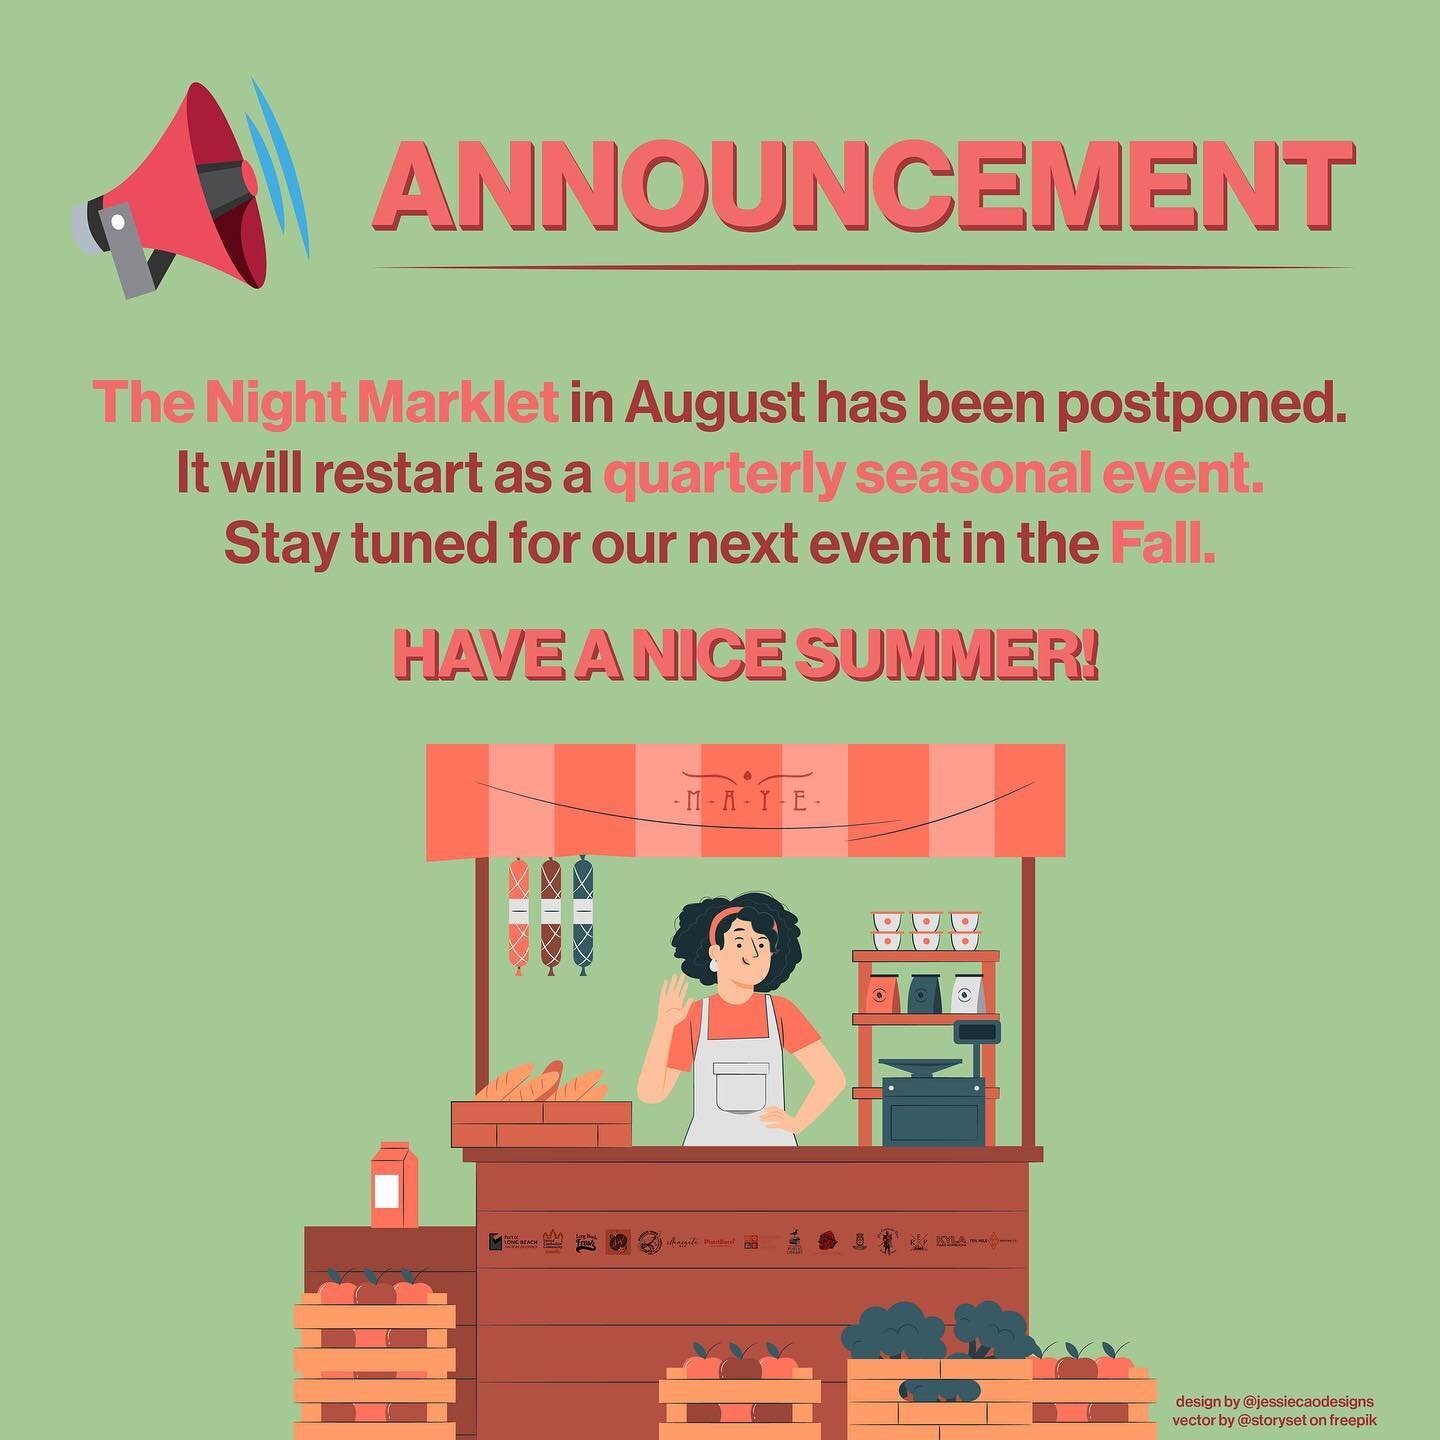 📣 ANNOUNCEMENT: The upcoming Night Marklet in August has been postponed and will restart as a quarterly seasonal event. Have a nice Summer, and stay tuned for our next event in the Fall.

🏷 #themayecenter #themayecenterlb #longbeach #nightmarklet